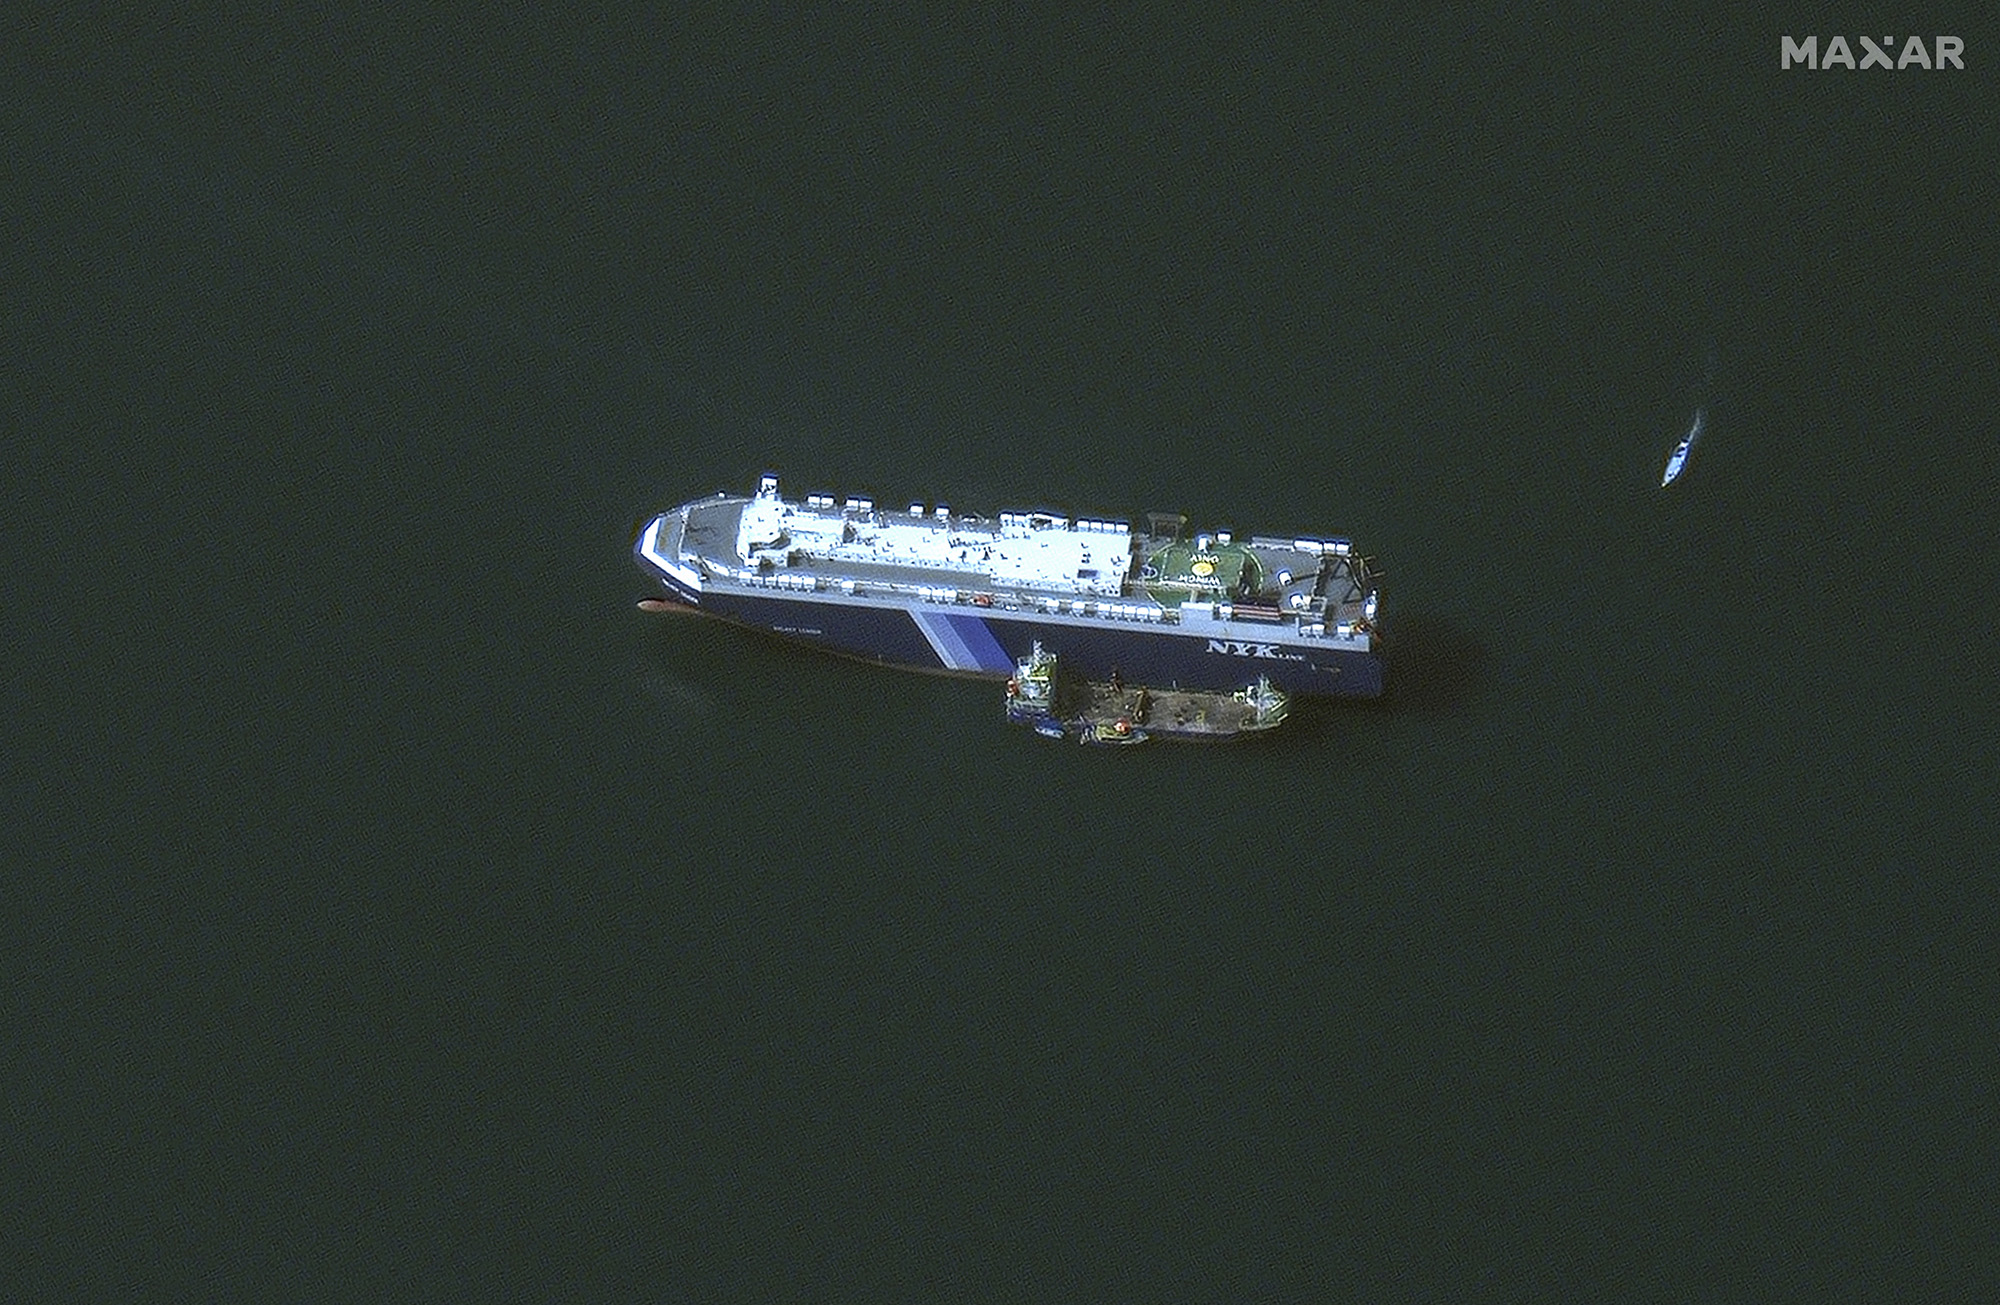 The Galaxy Leader ship anchored offshore of As Salif, Yemen, on November 28, with a support tender vessel positioned nearby. The ship was captured by Houthi fighters on November 19. 